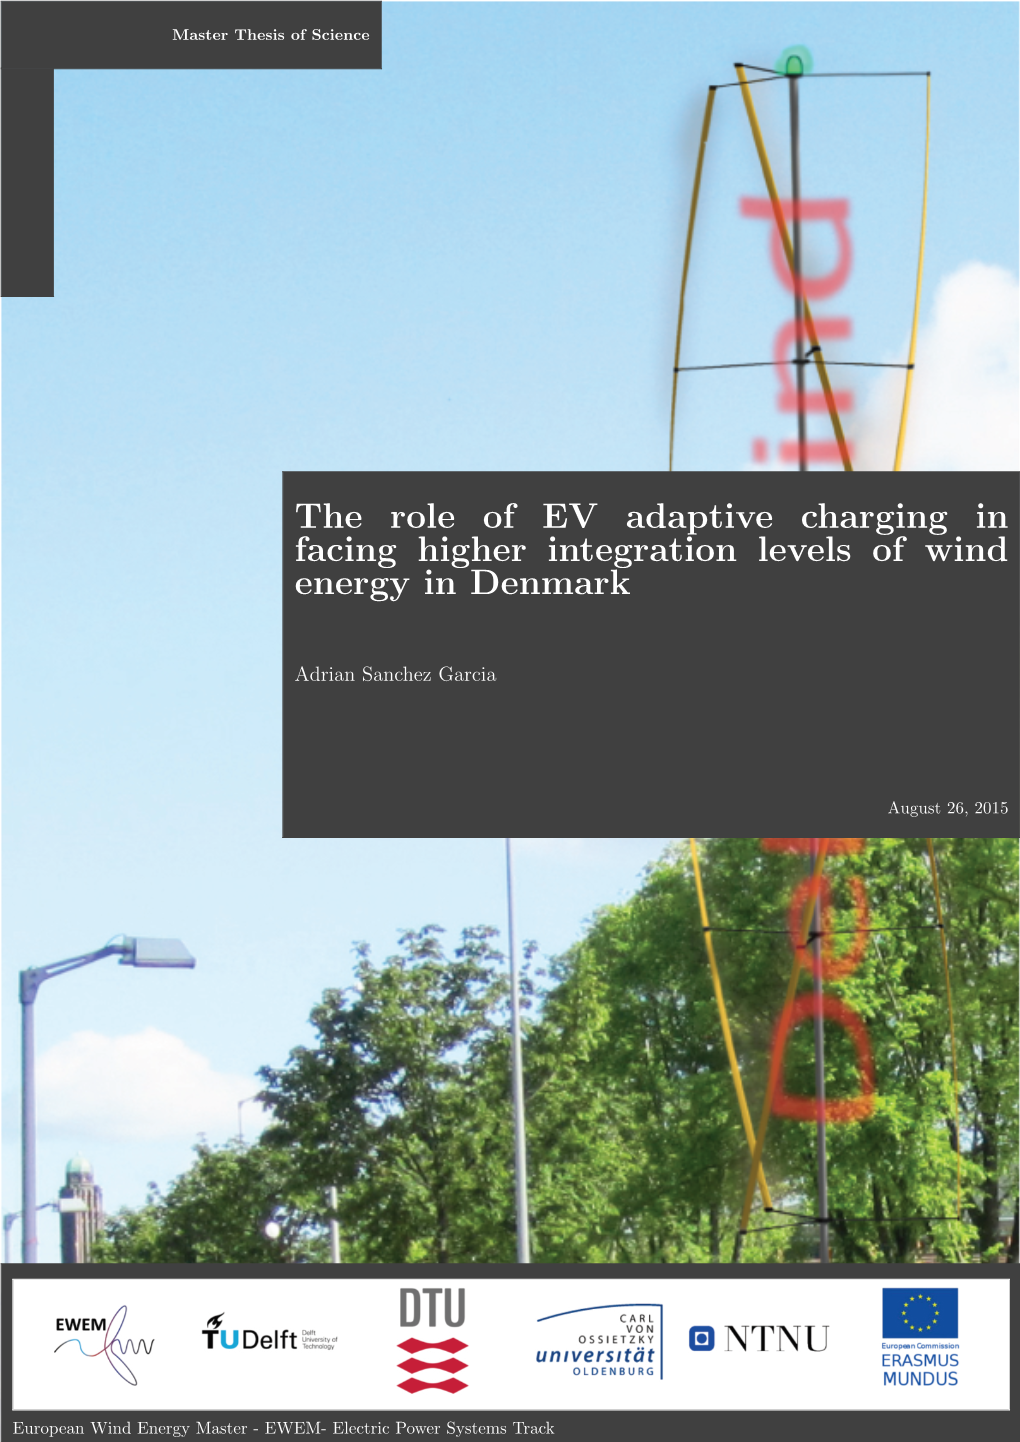 The Role of EV Adaptive Charging in Facing Higher Integration Levels of Wind Energy in Denmark